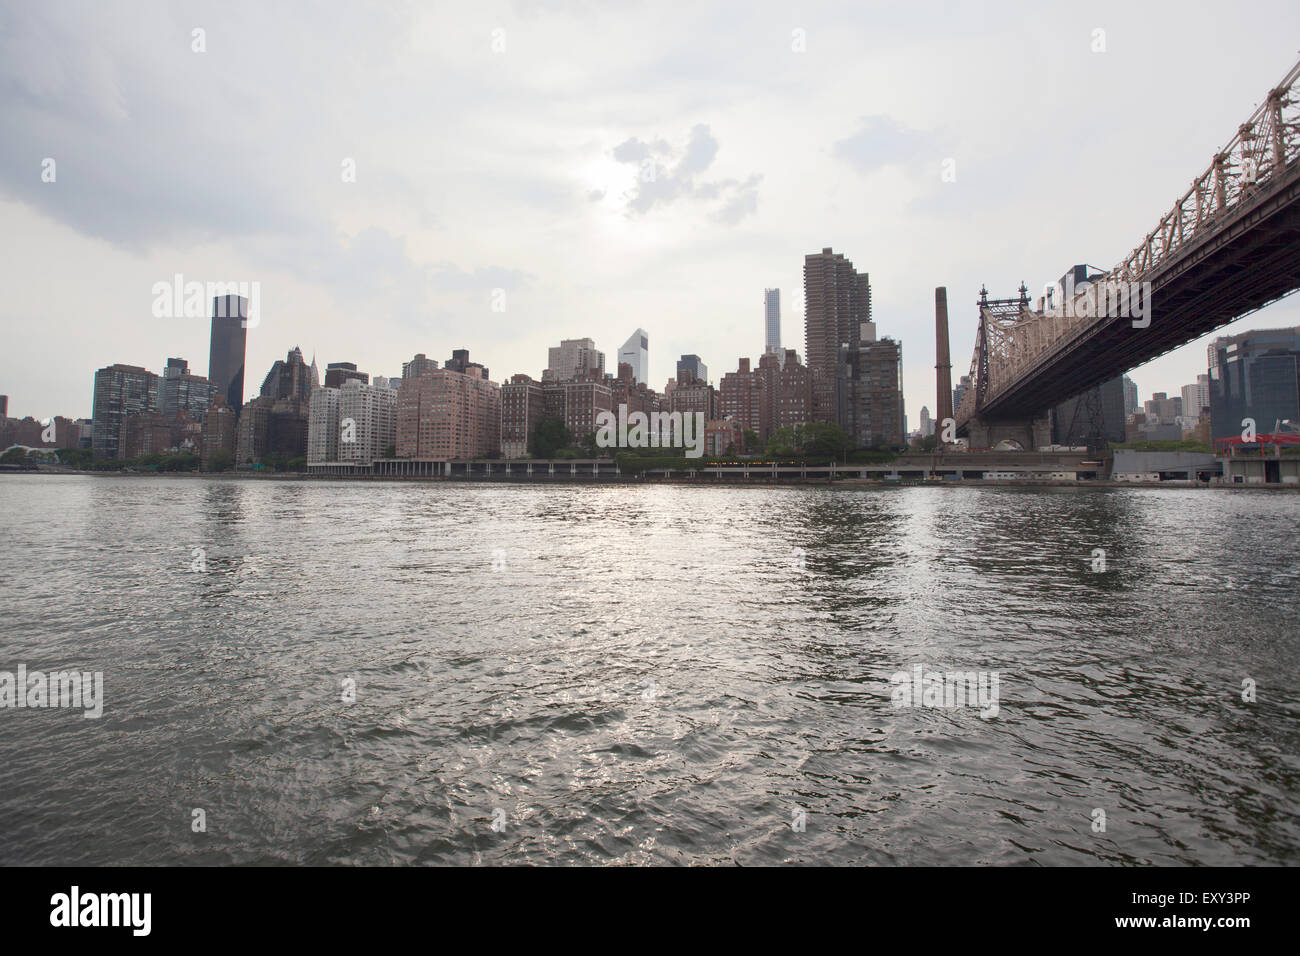 NEW YORK - May 28, 2015: View of Manhattan from Roosevelt Island as seen on May 28, 2015. Stock Photo